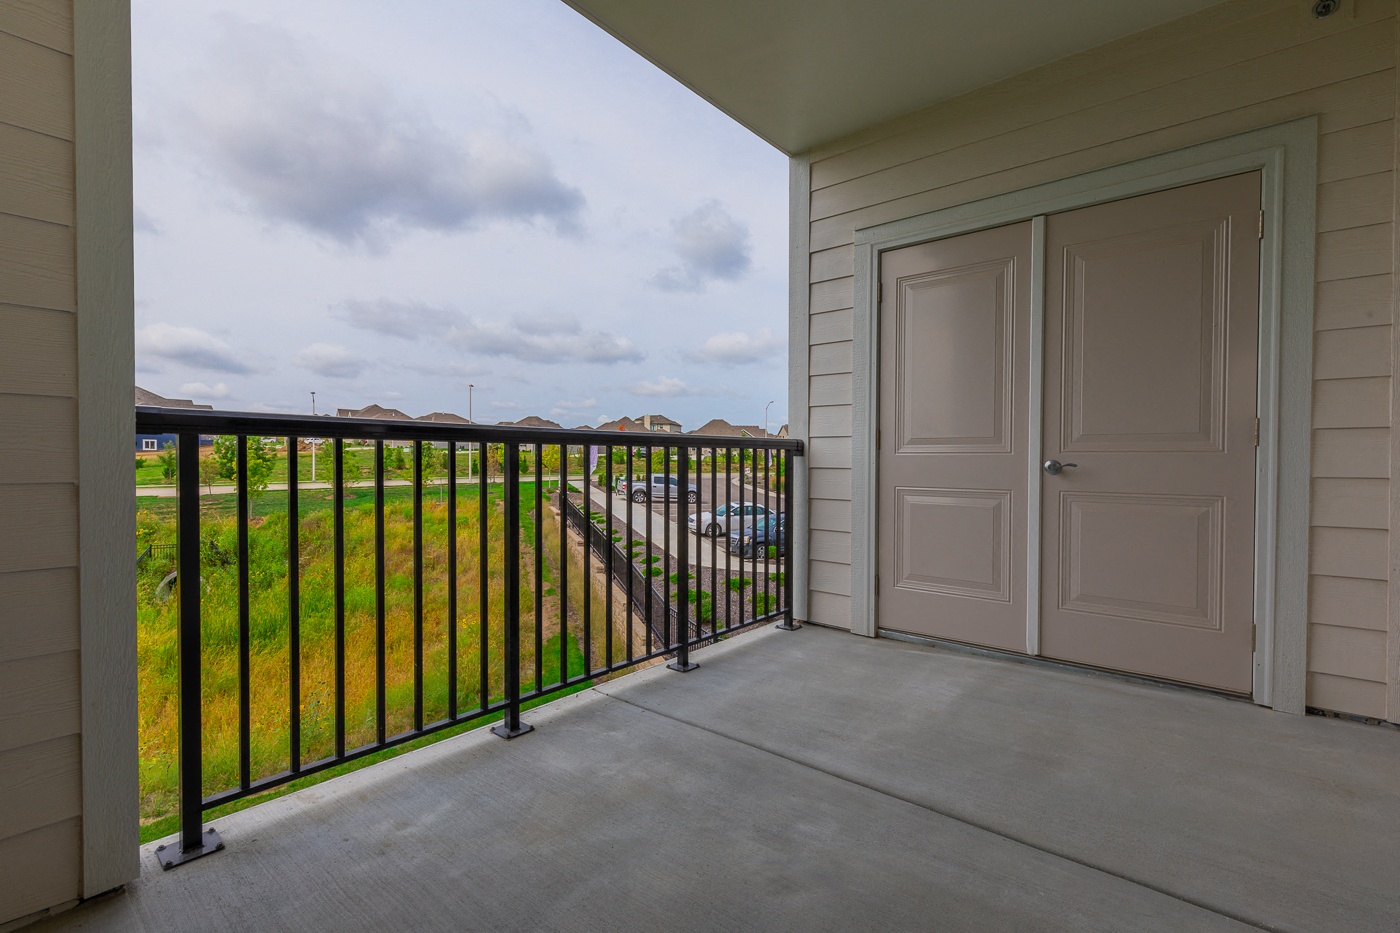 Private Balcony at The Residences at Bluhawk Apartments, Overland Park, KS, 66085